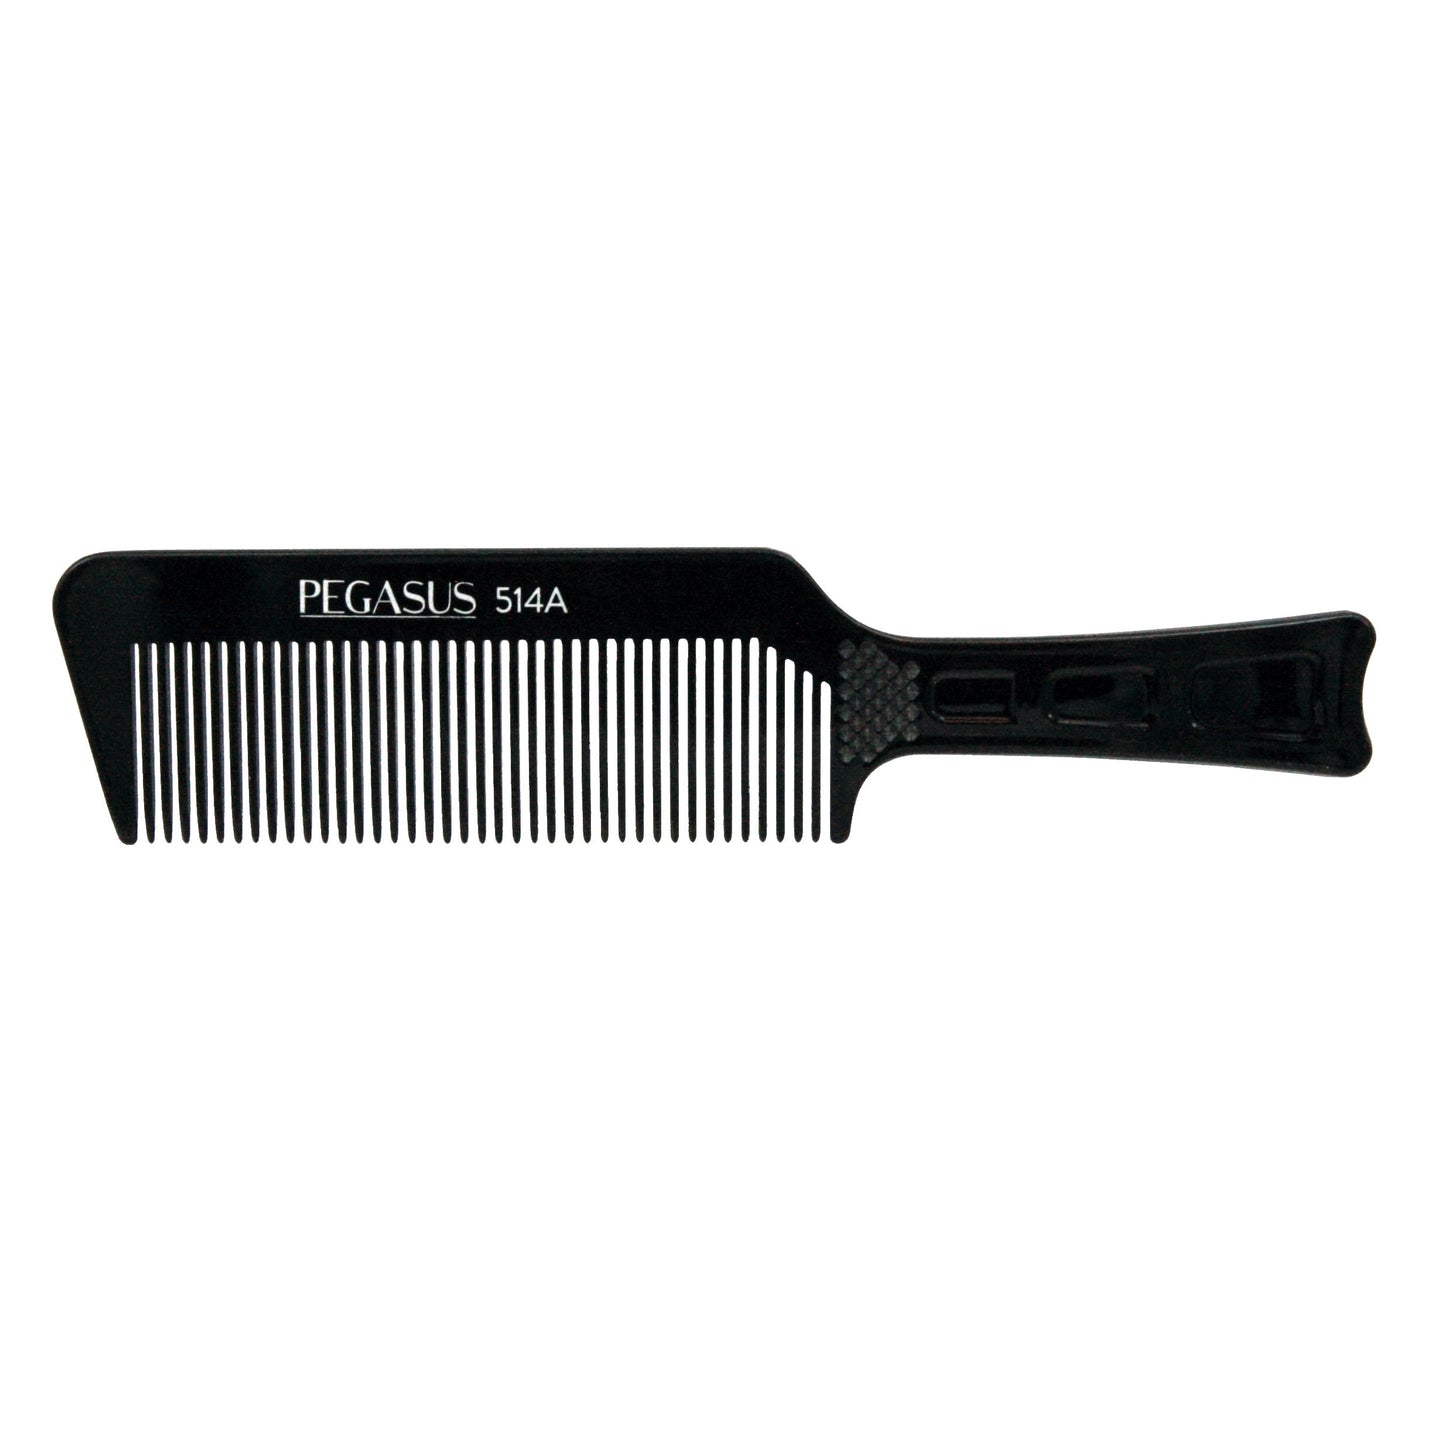 Pegasus 514A, 8.75in Hard Rubber Fine Tooth Flattop Butch Comb, Handmade, Seamless, Smooth Edges, Anti Static, Heat and Chemically Resistant Comb | Peines de goma dura - Black